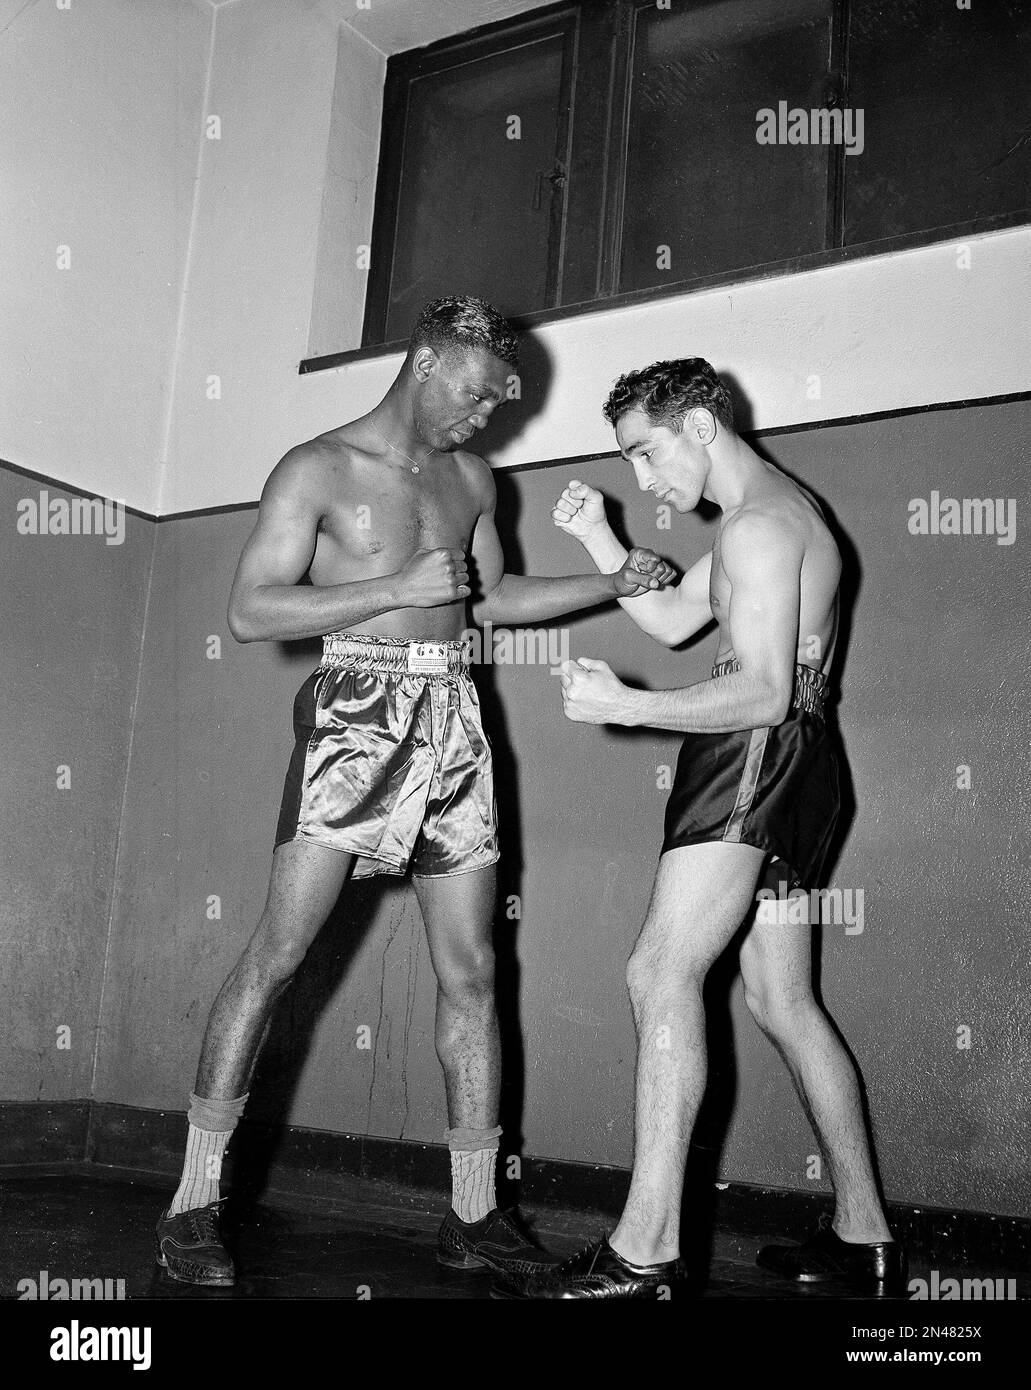 Chalky Wright, left, of Los Angeles, and Willie Pep of Hartford